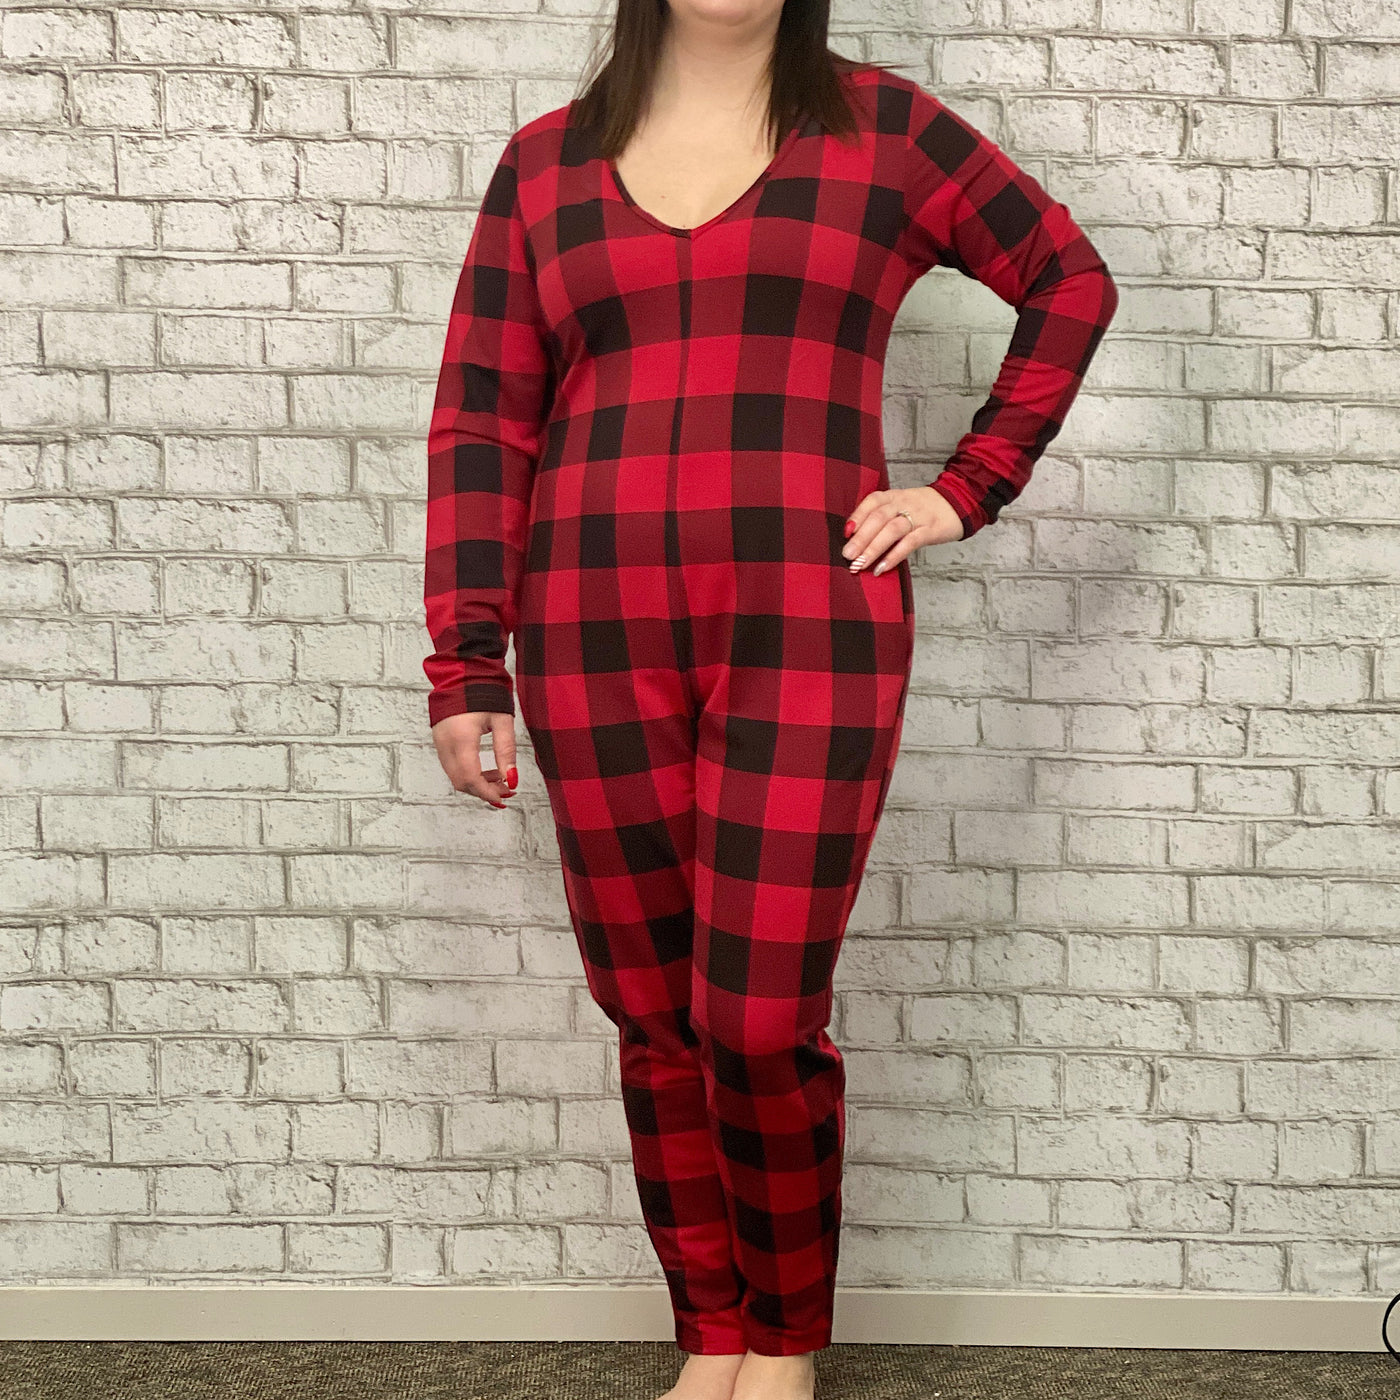 The Cozy Friday Romper